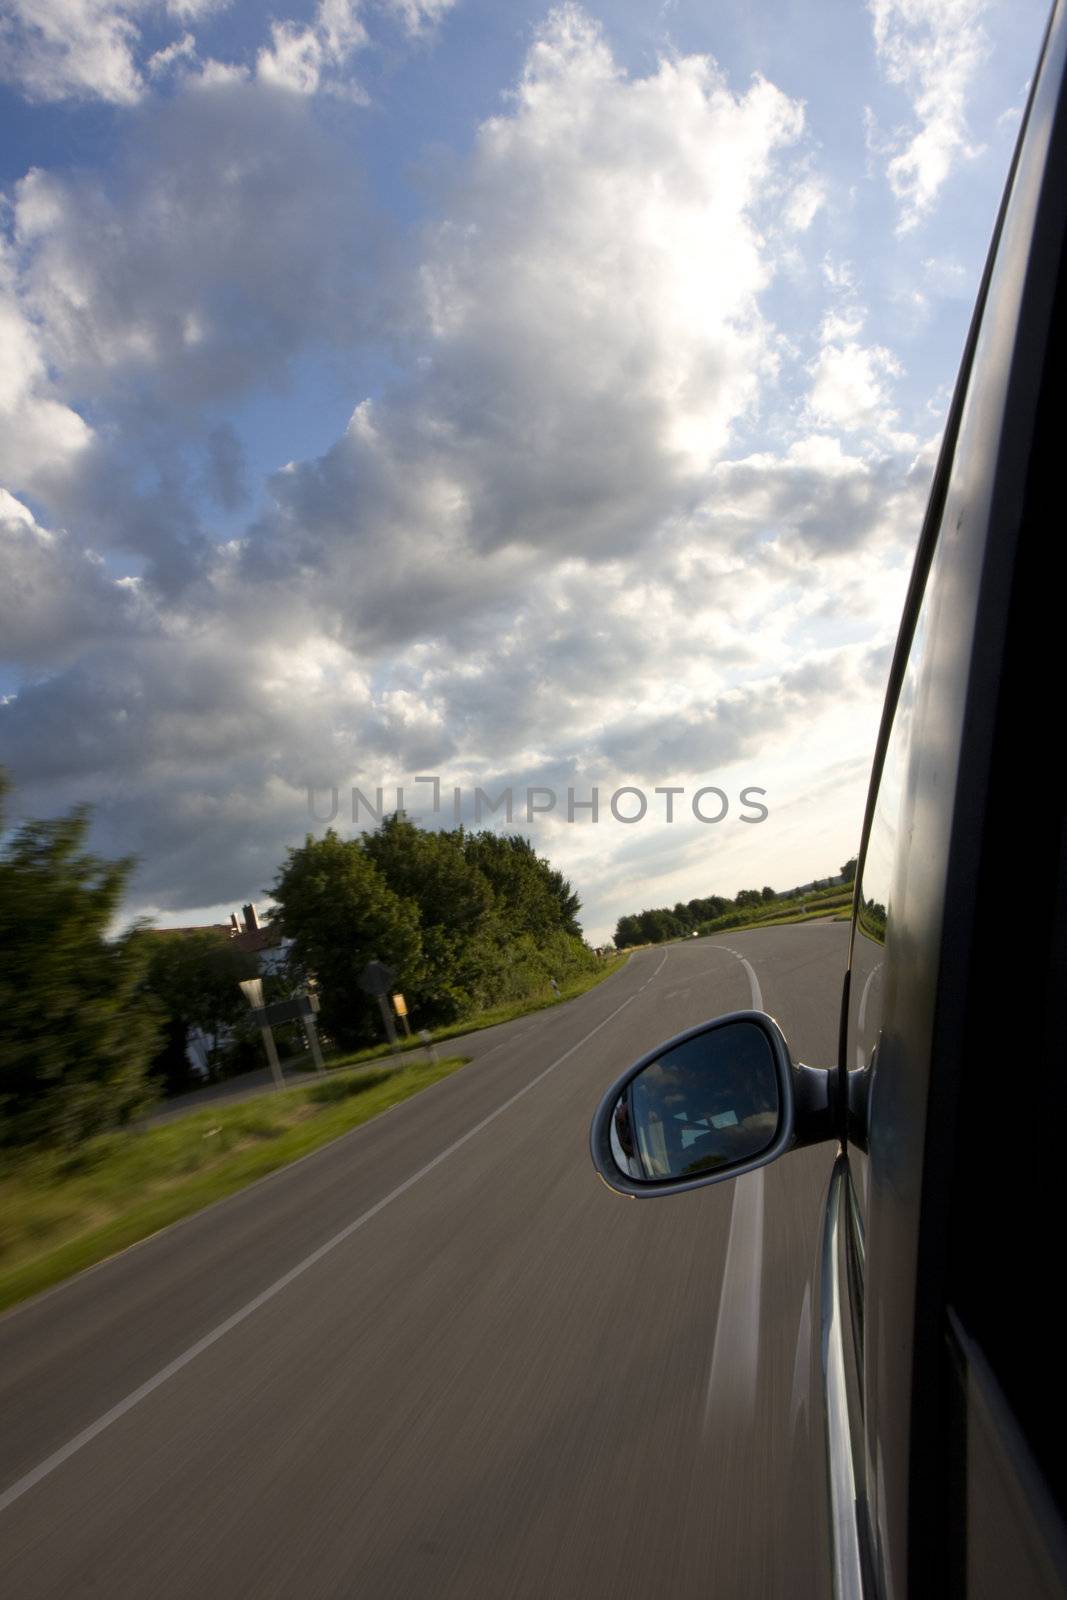 detail of a car driving on a country road by bernjuer